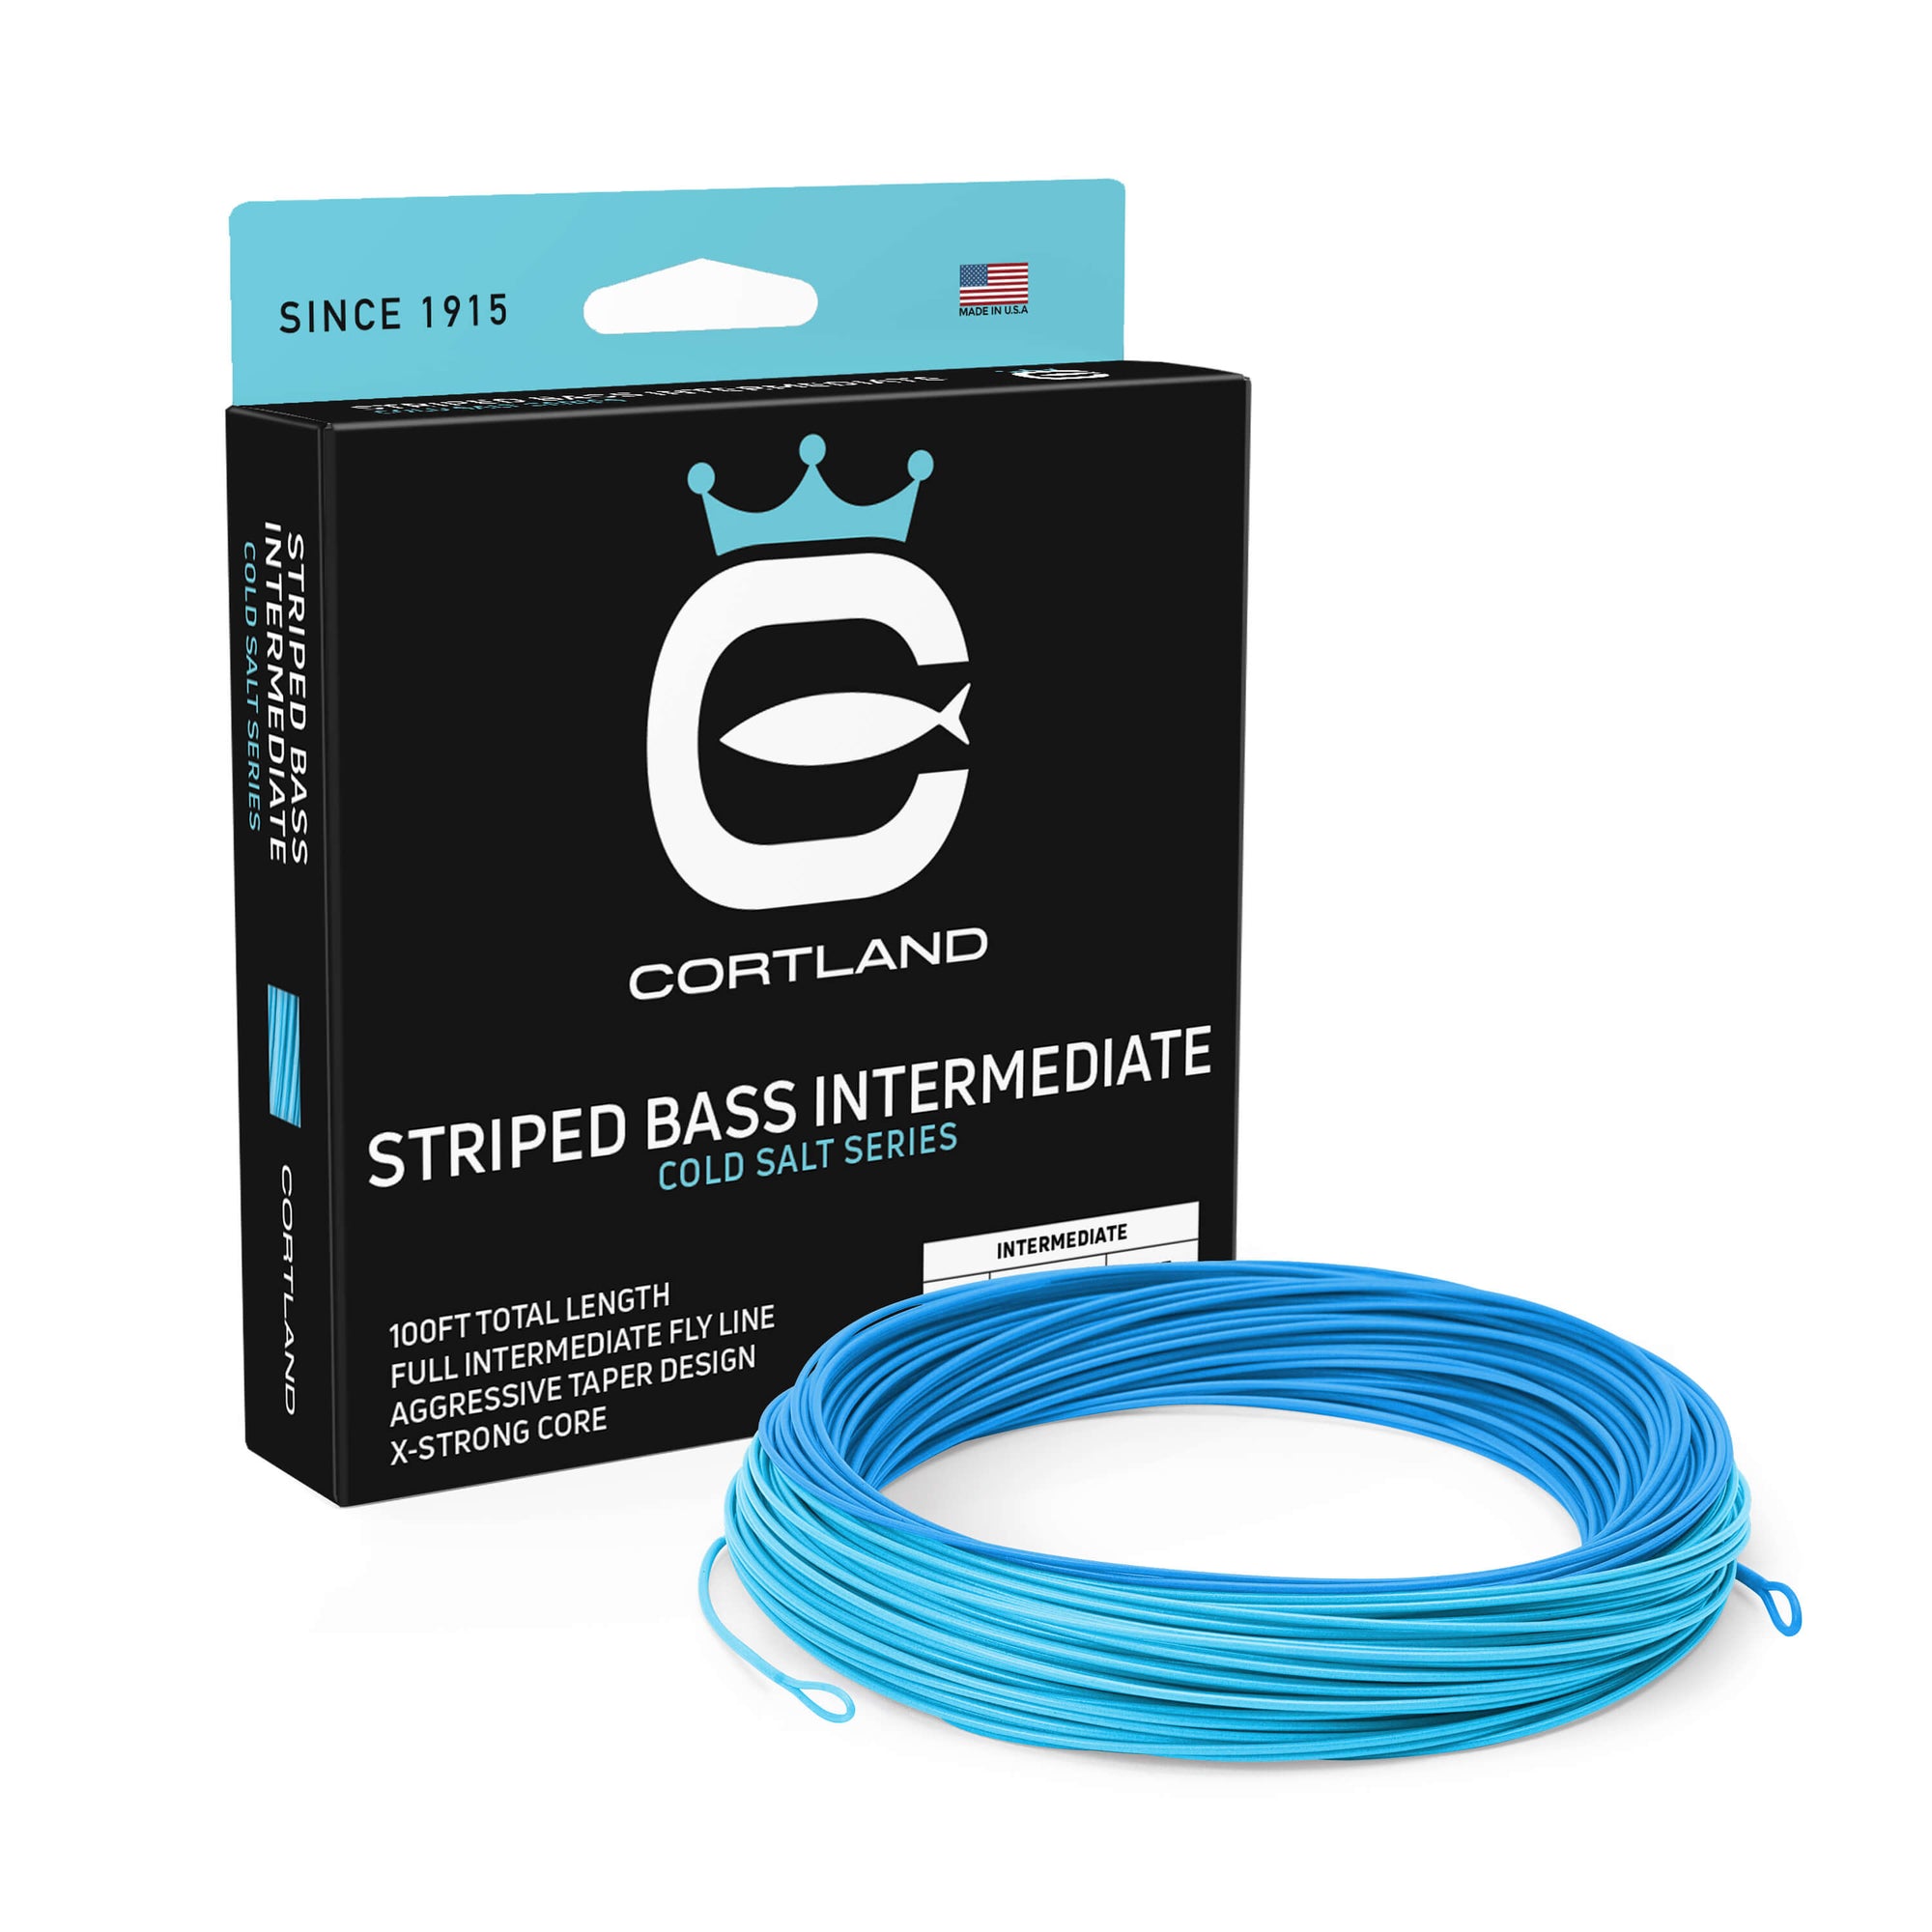 Striped Bass Intermediate Fly Line Box and Coil. The coil is ice blue. The box is black and light blue at the top. 